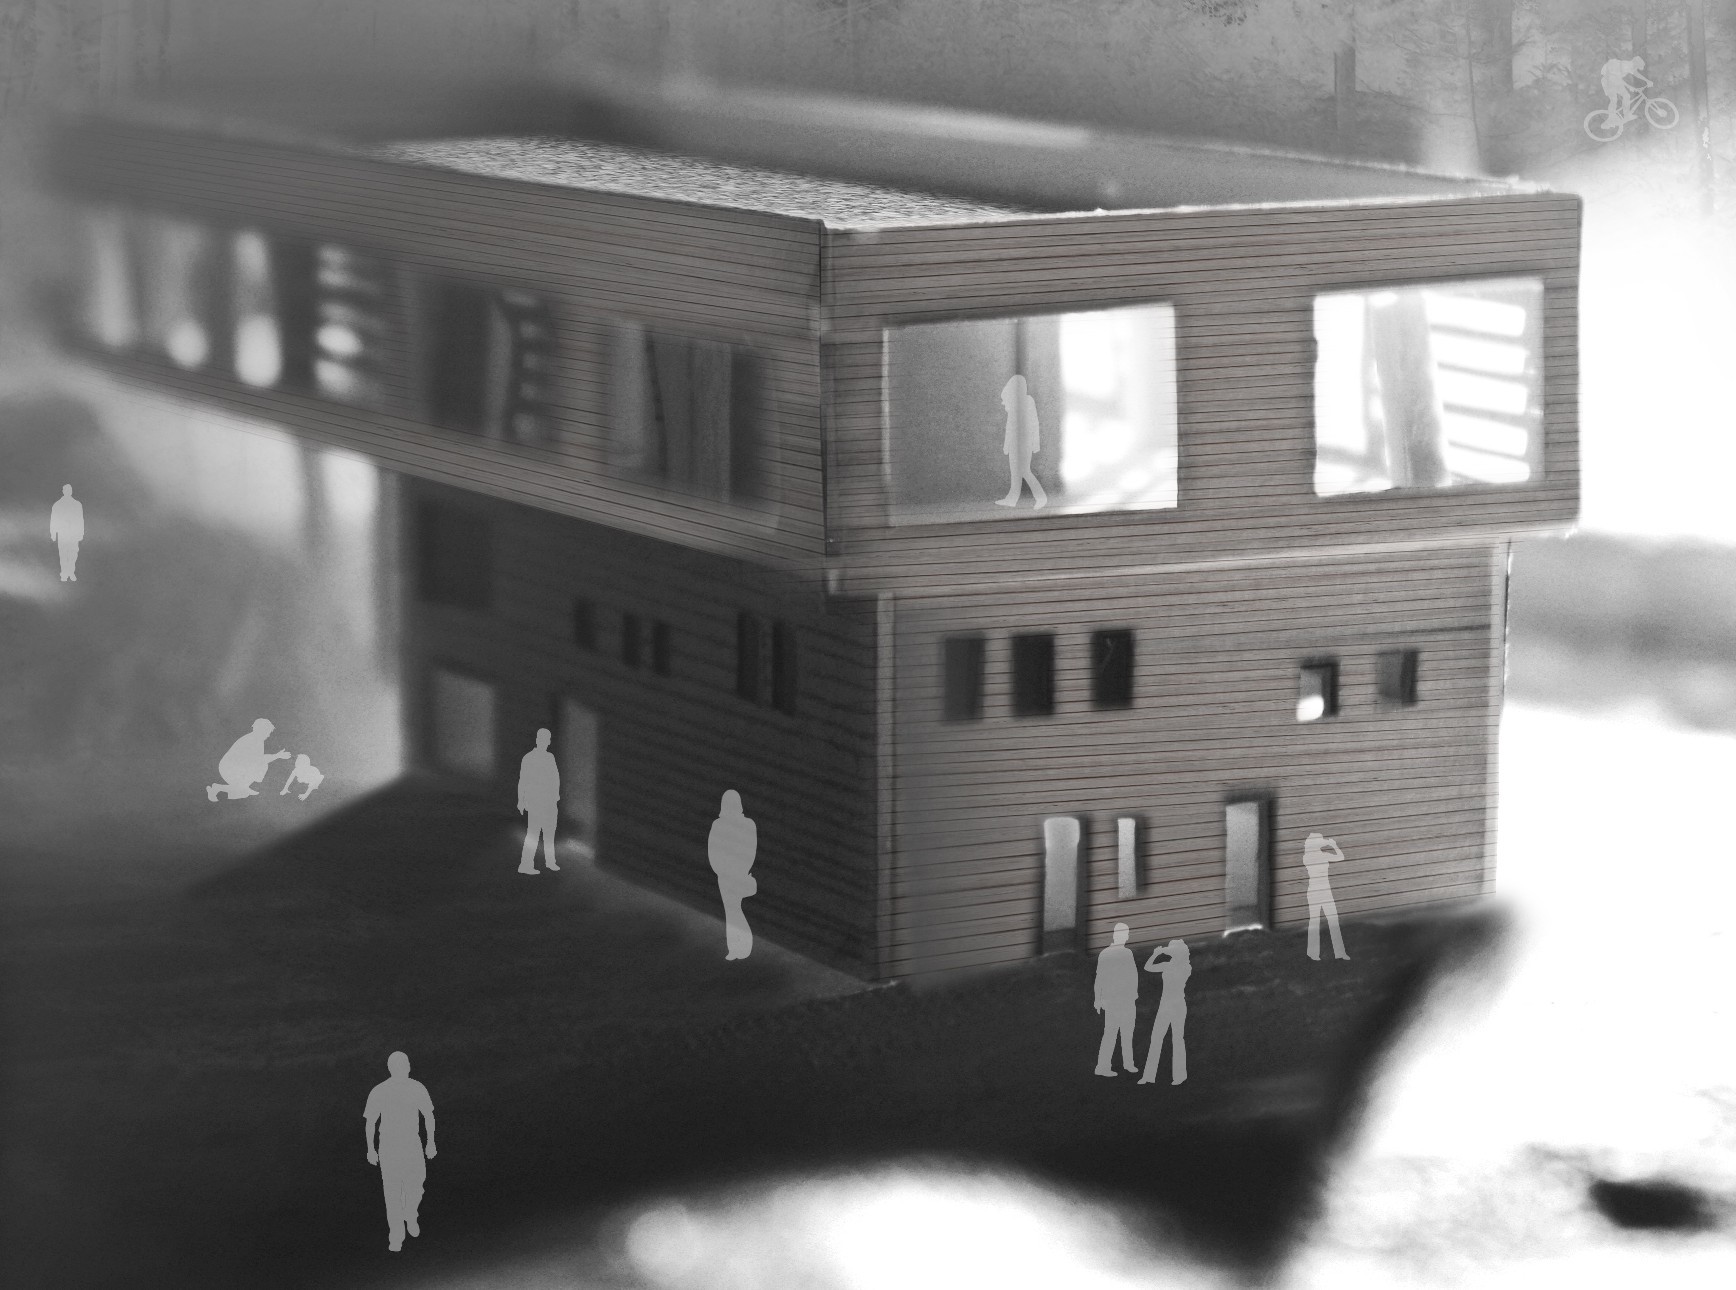 Second year student Johanna Kleesattel's design for a potential trail centre